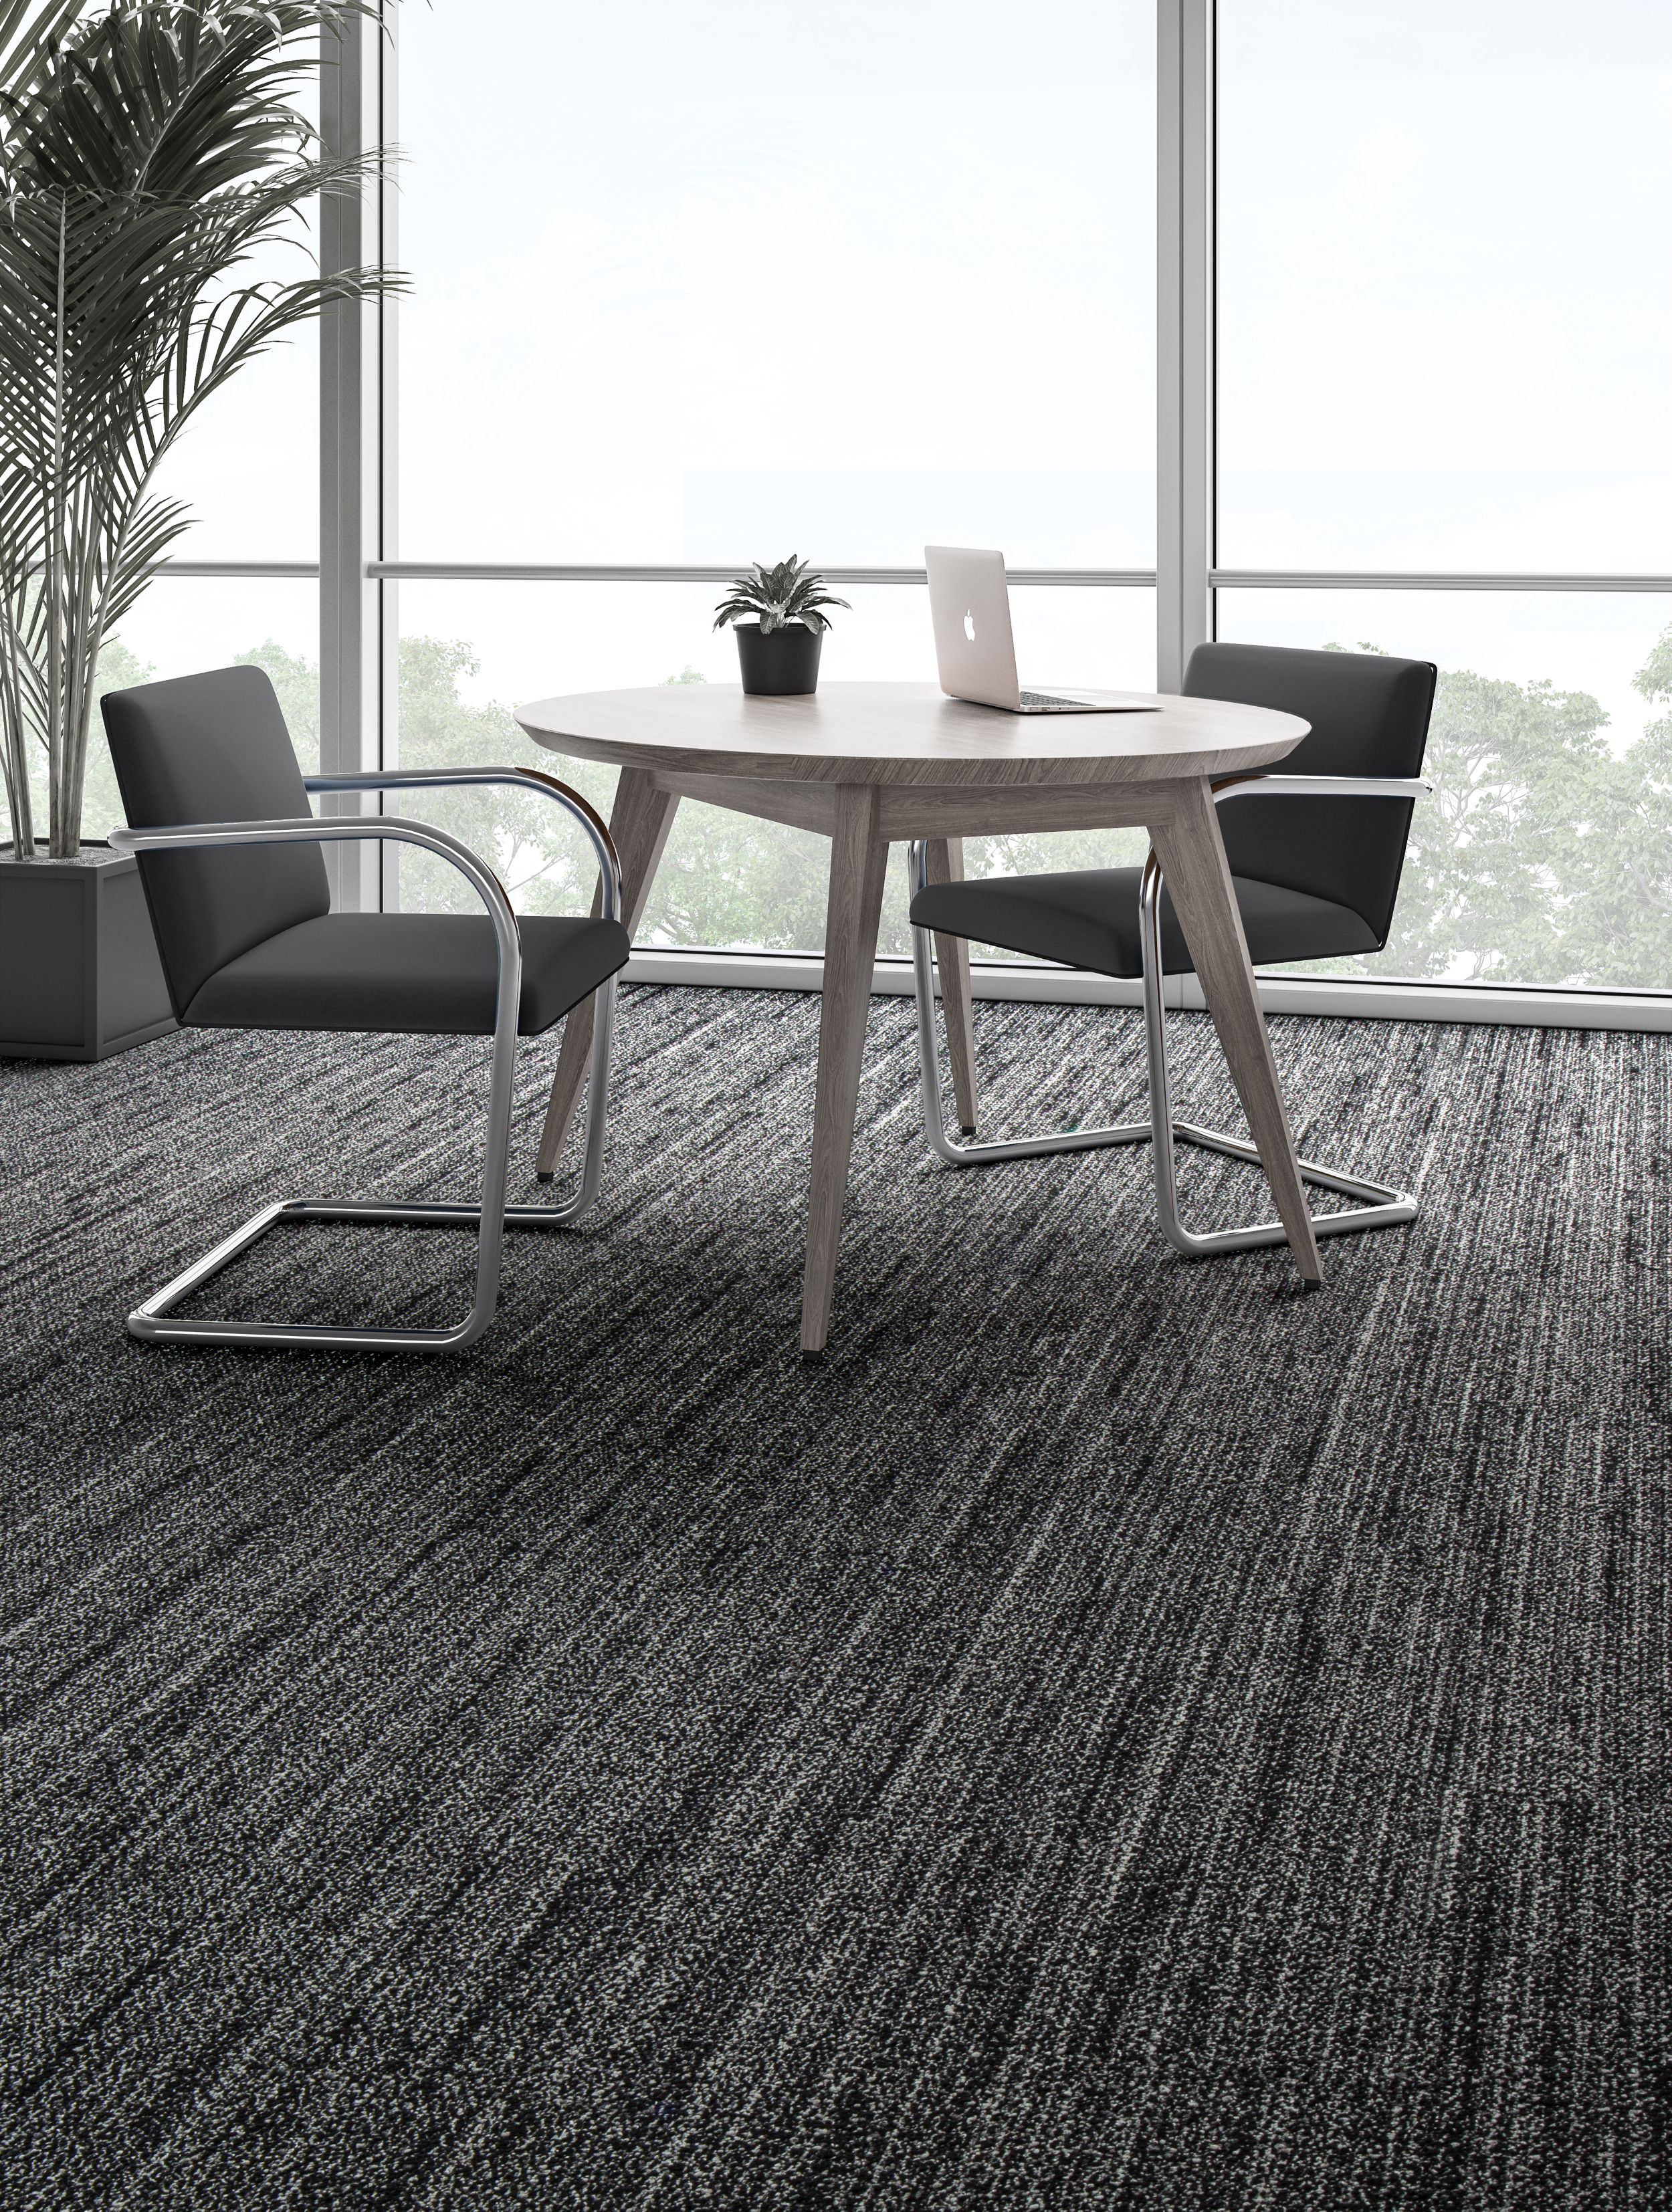 image Interface WW870 plank carpet tile shown with small table and chairs numéro 12